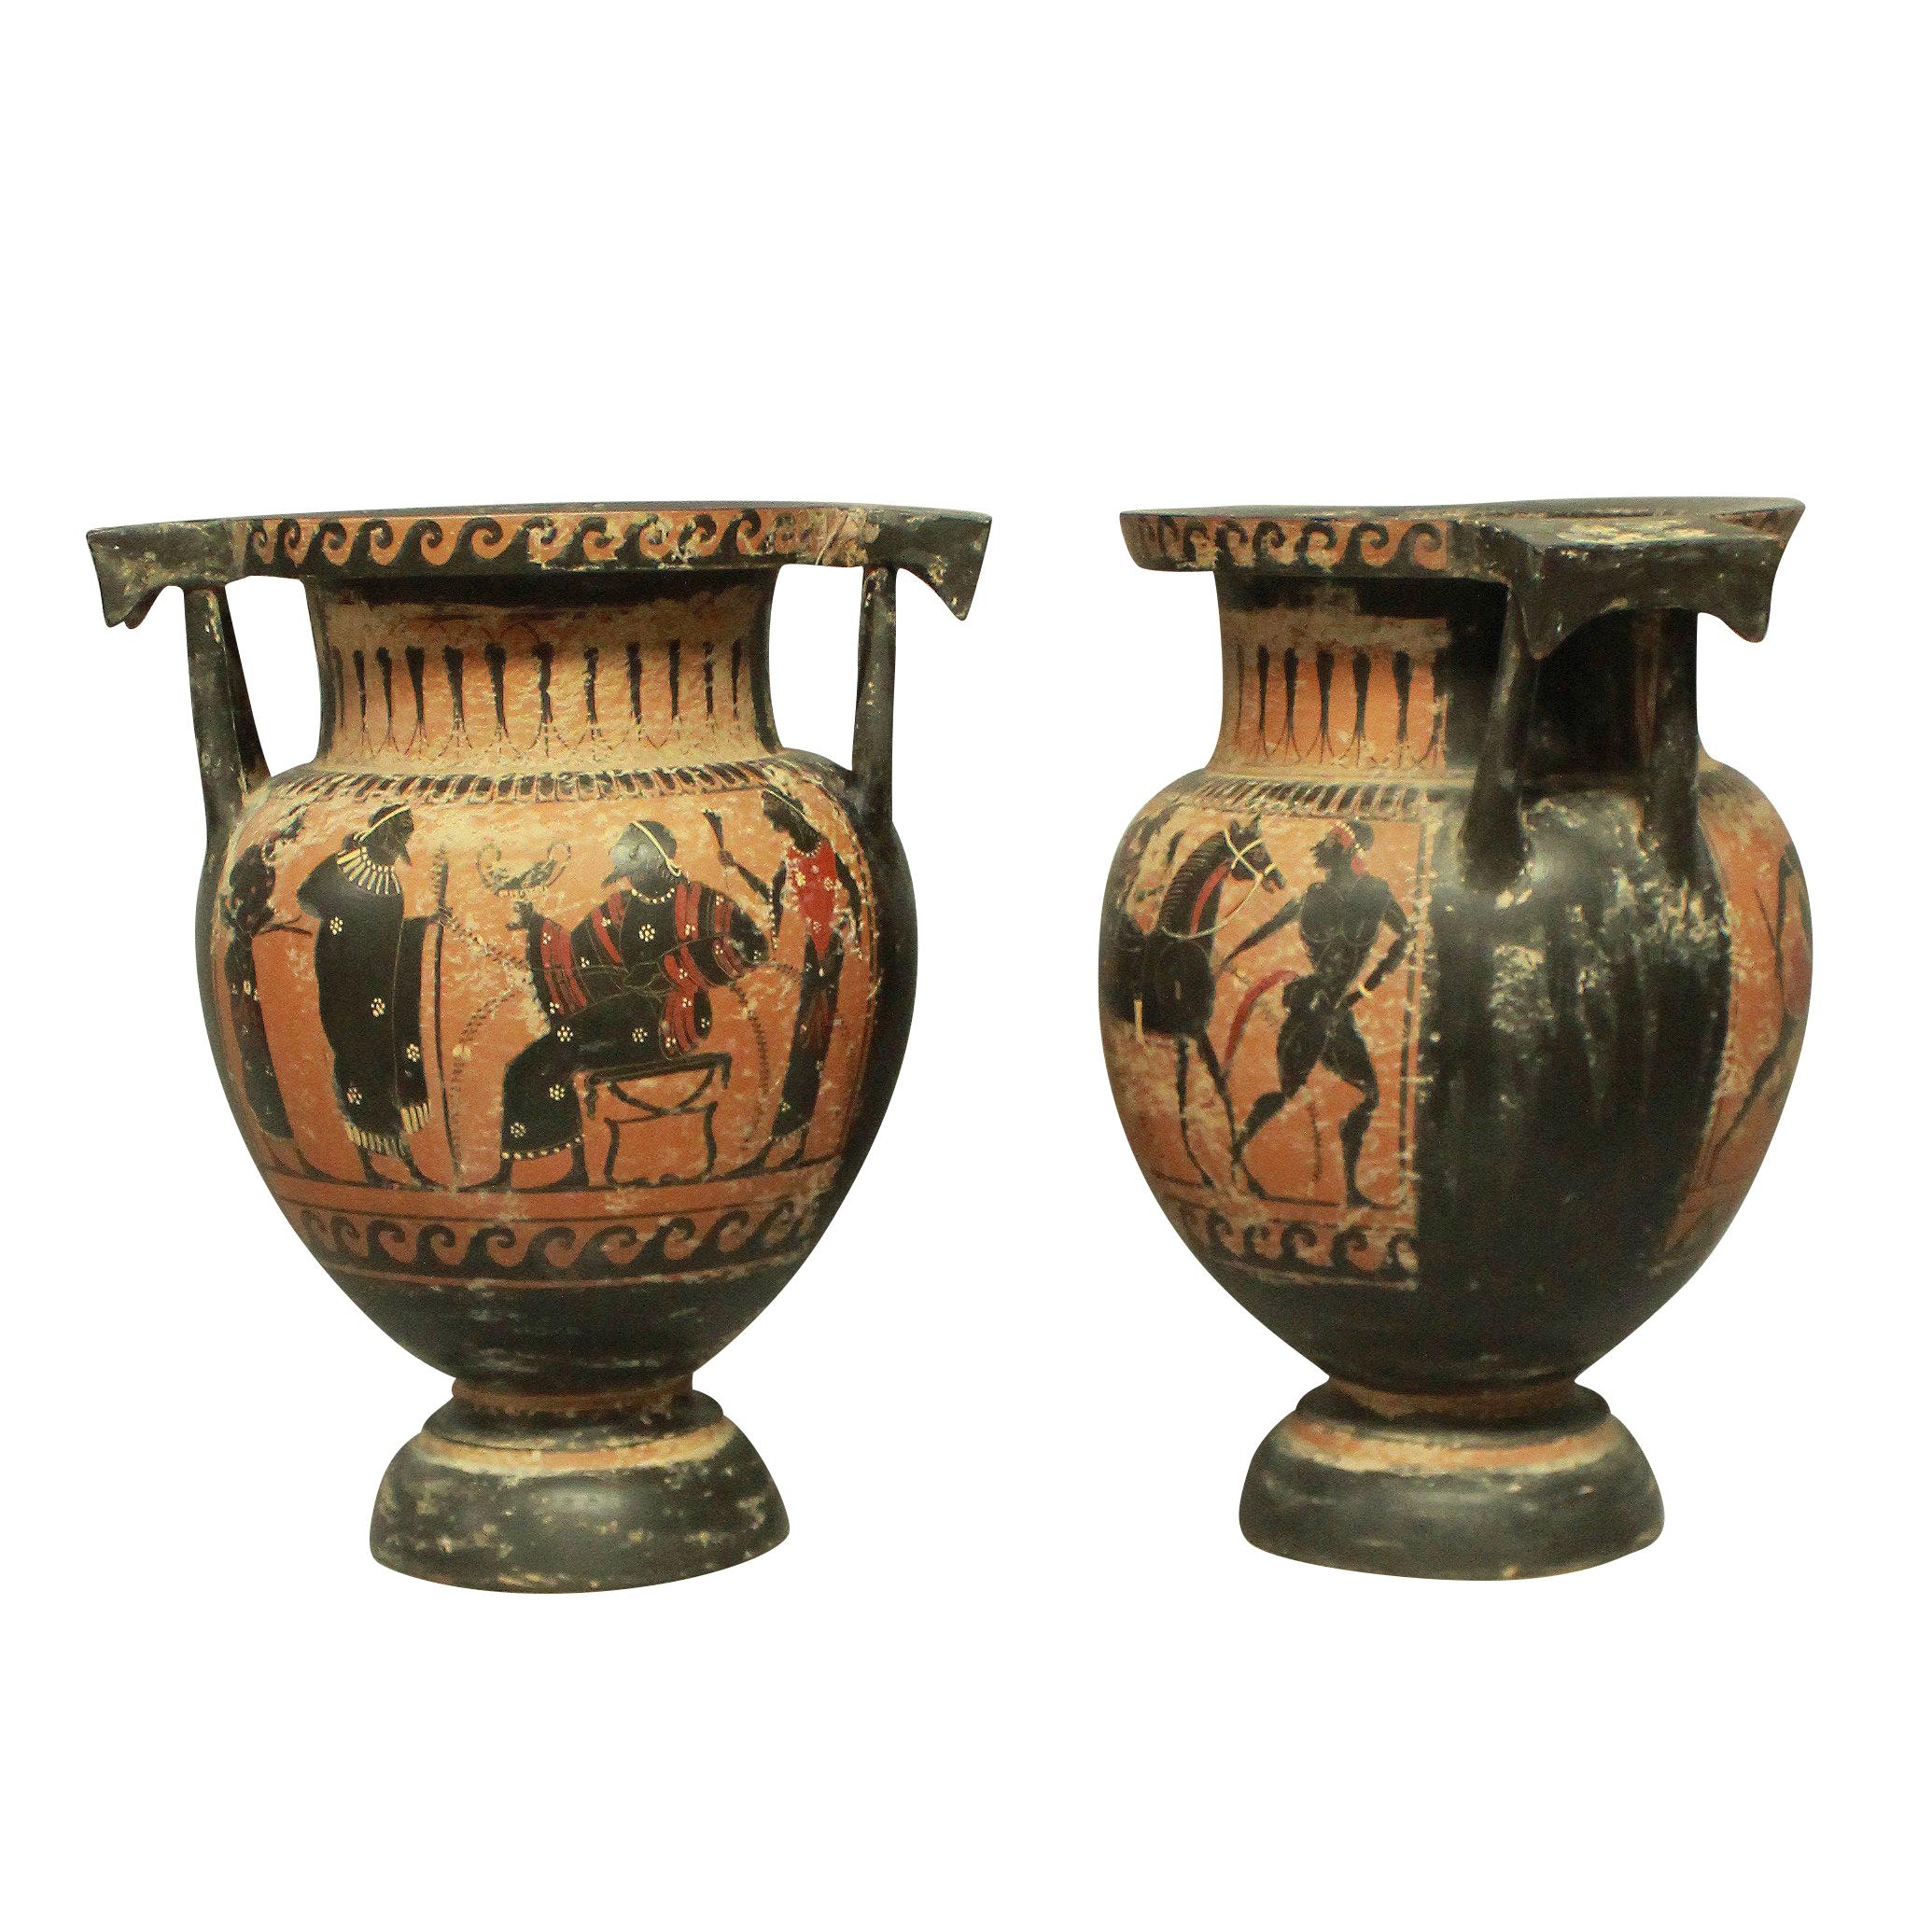 Terracotta Important Collection of Grand Tour Greek Krater Vases